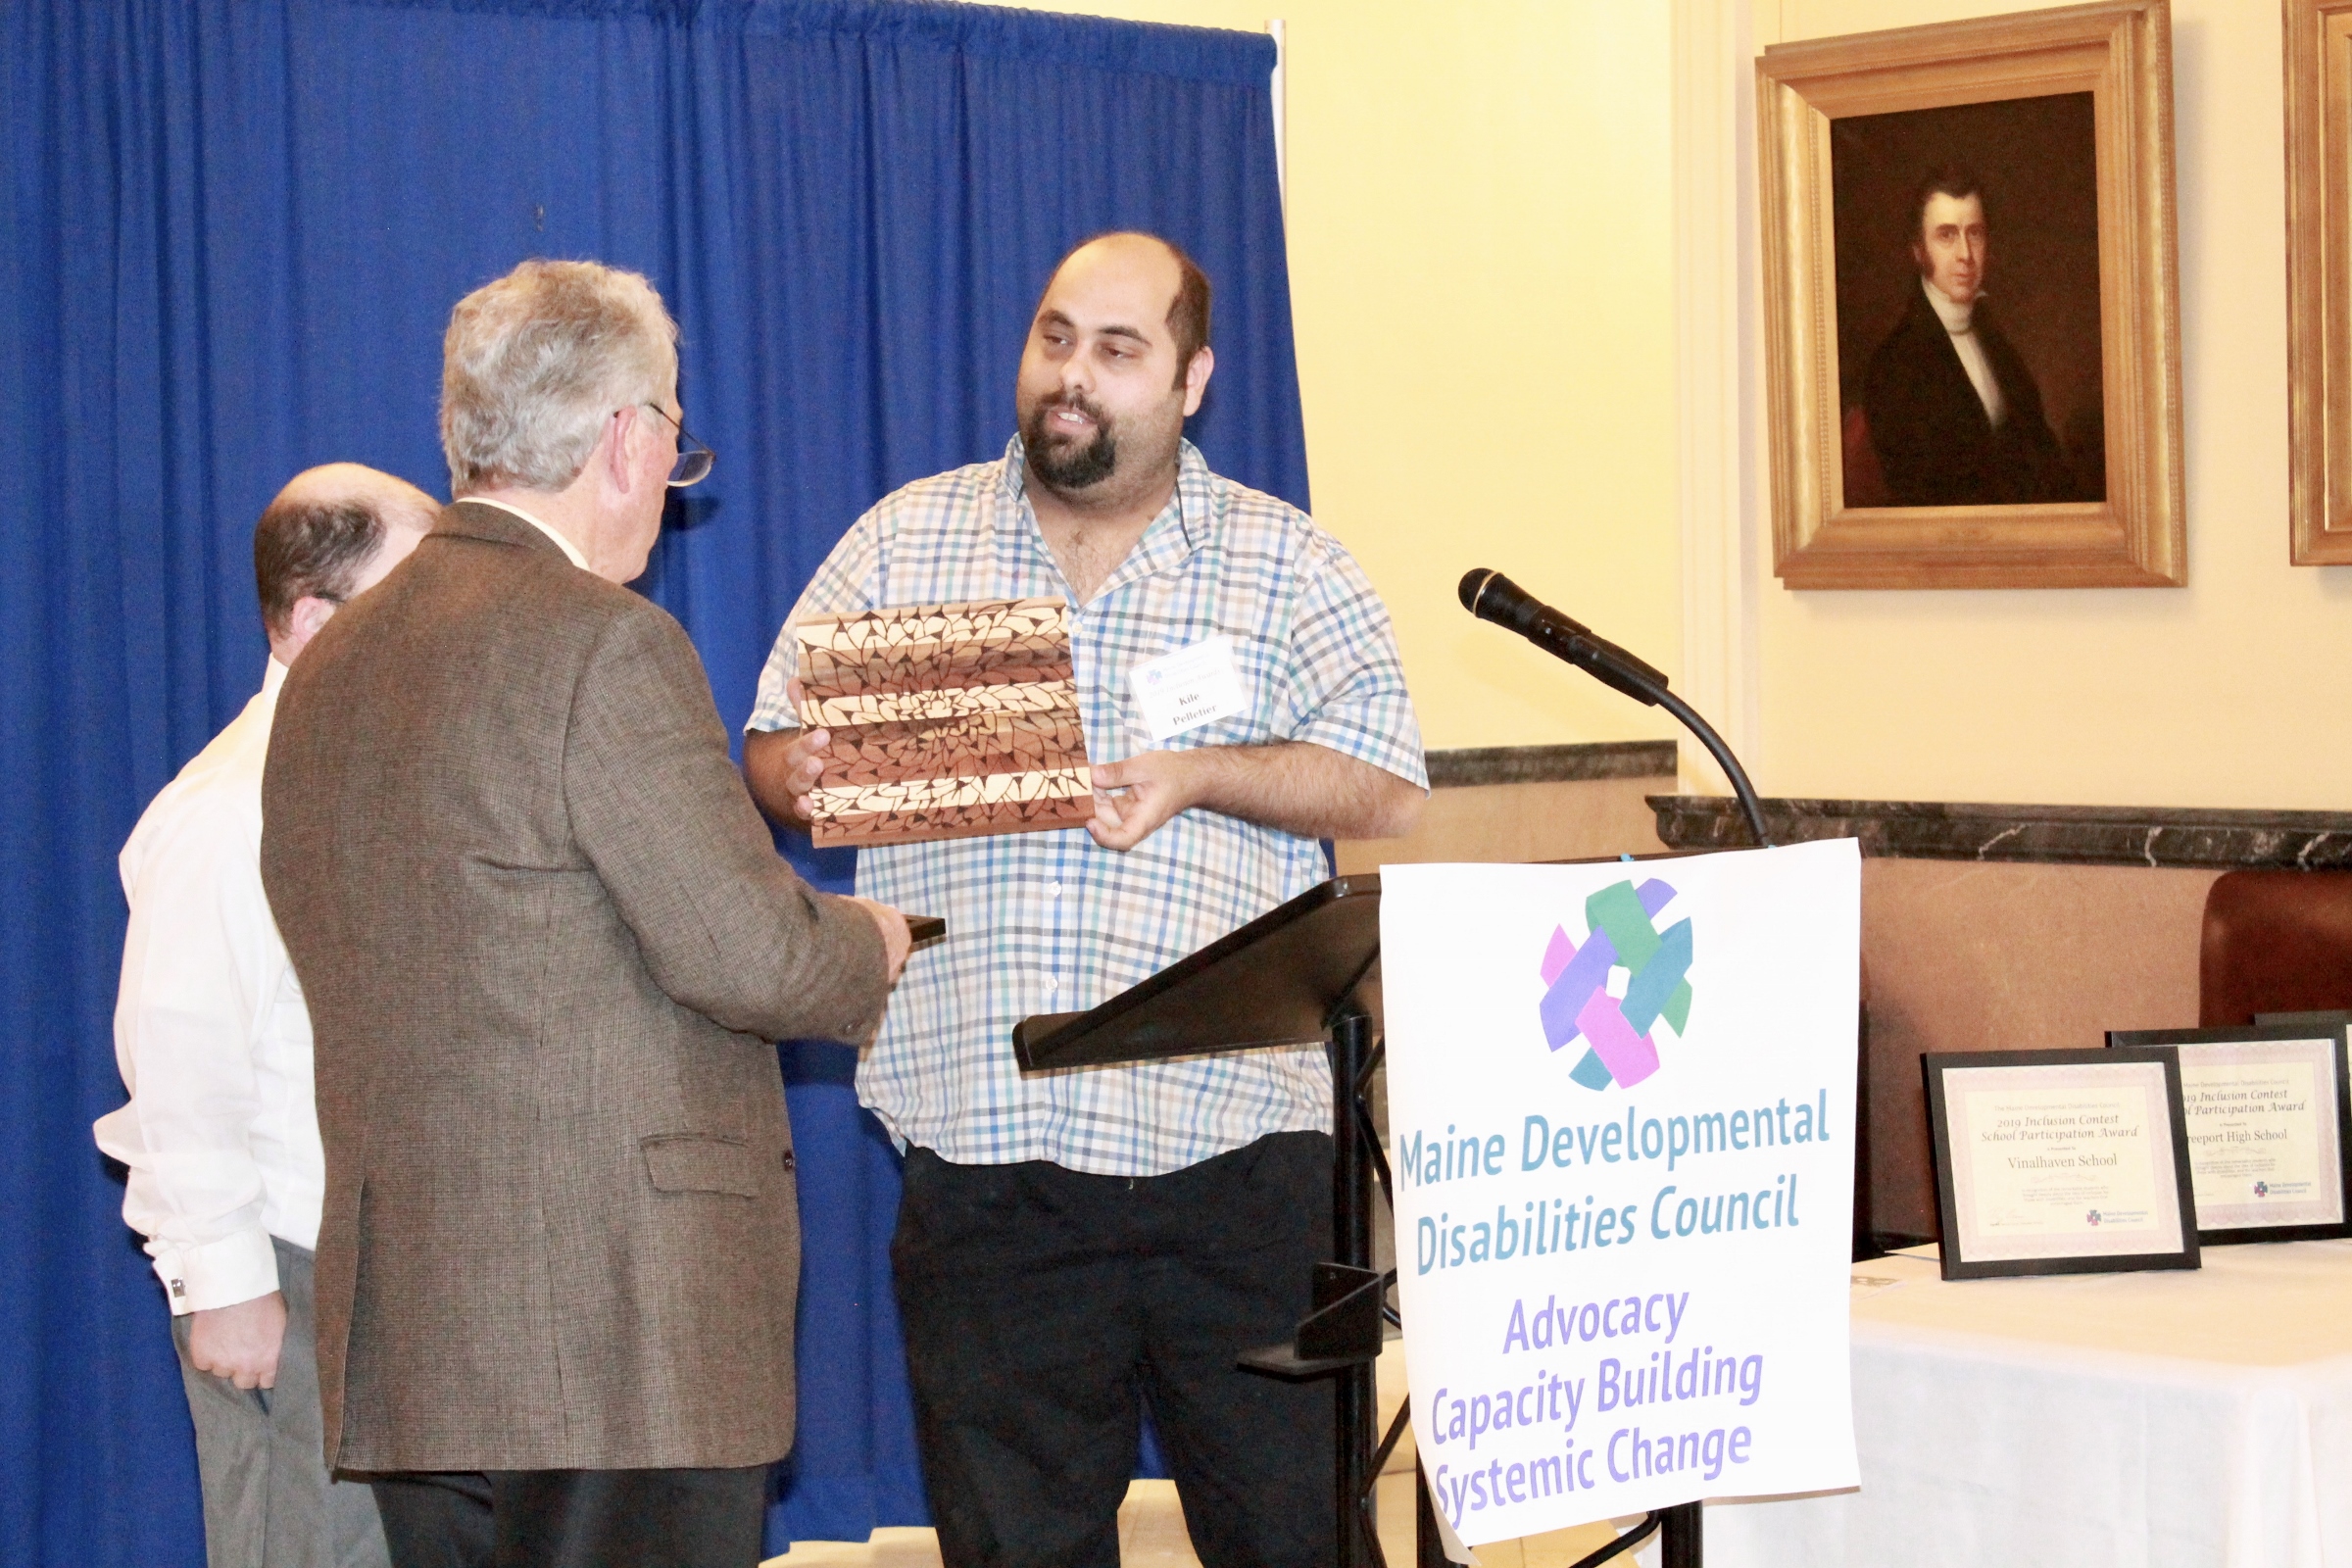 Kile Pelletier hands an award to a State Representative at the 2019 Inclusion Awards